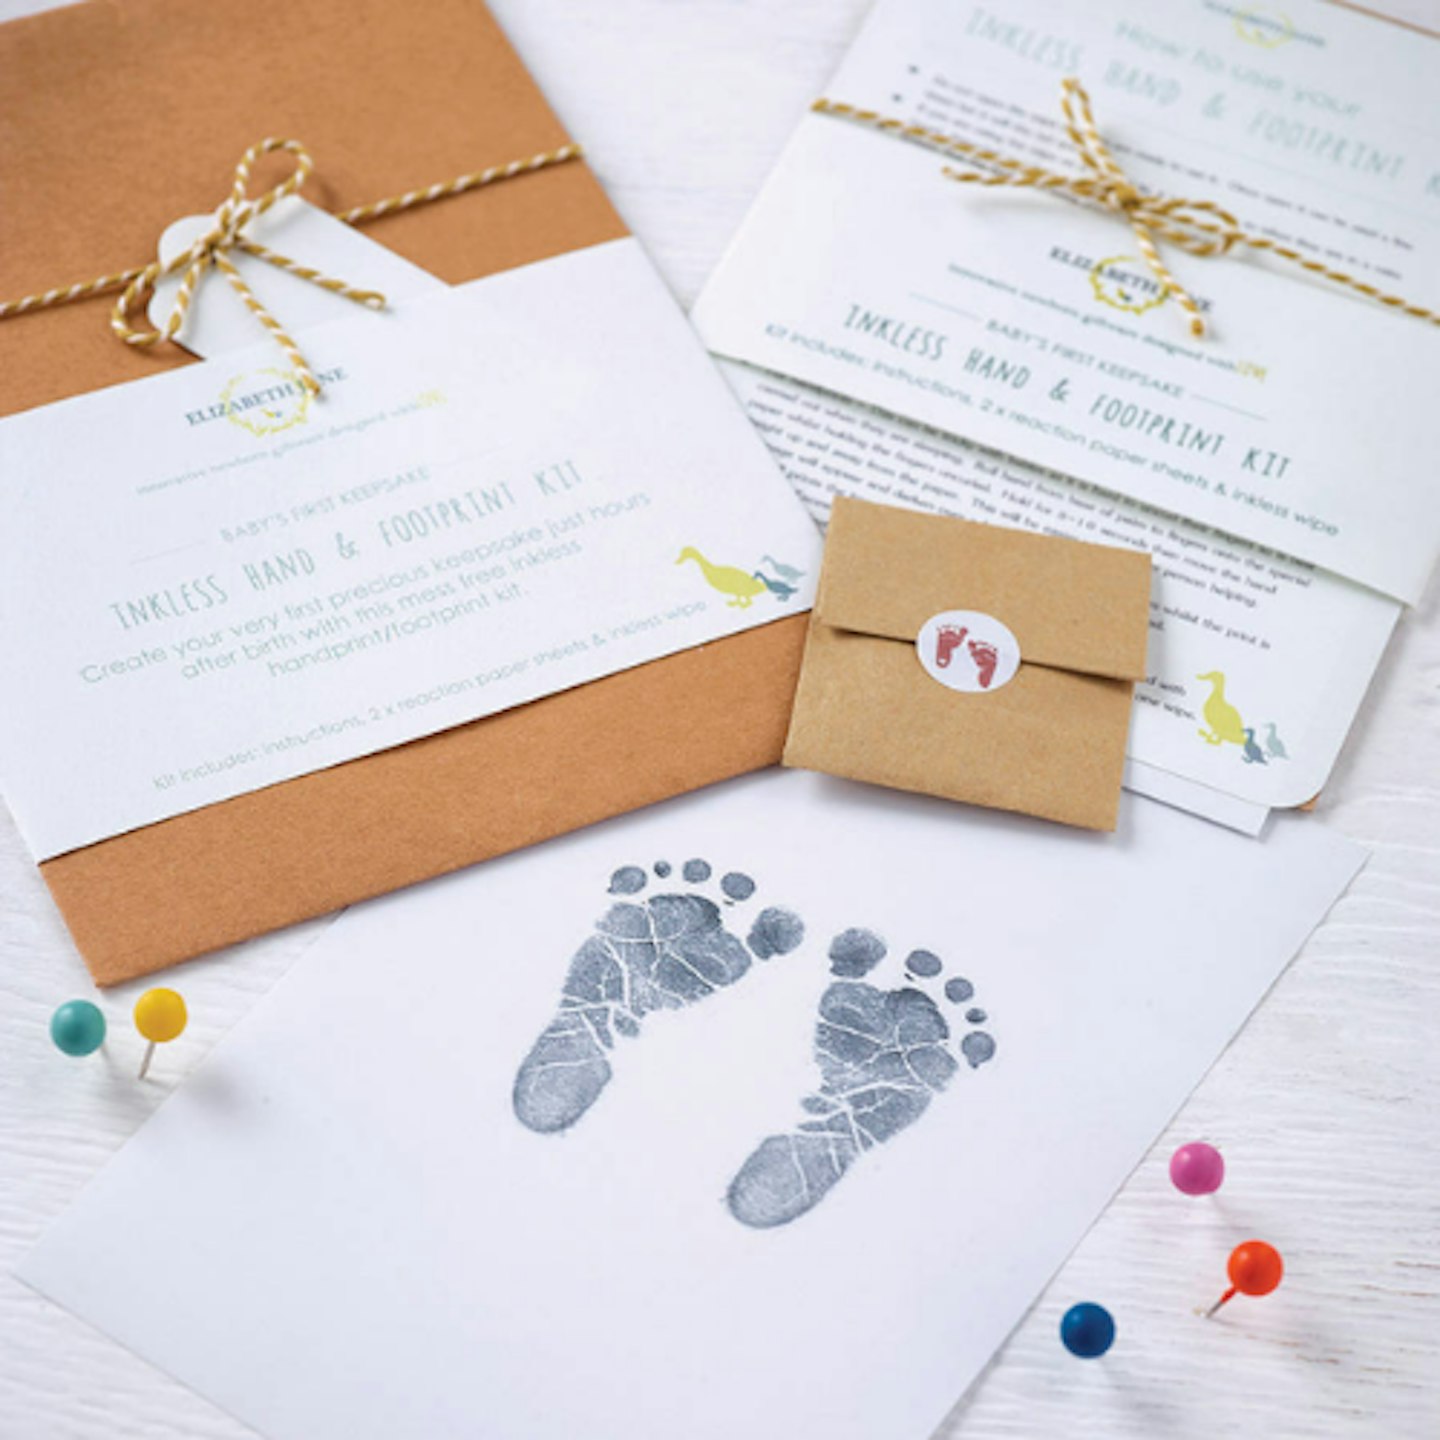 Elizabeth Jane - best gifts for mums-to-be